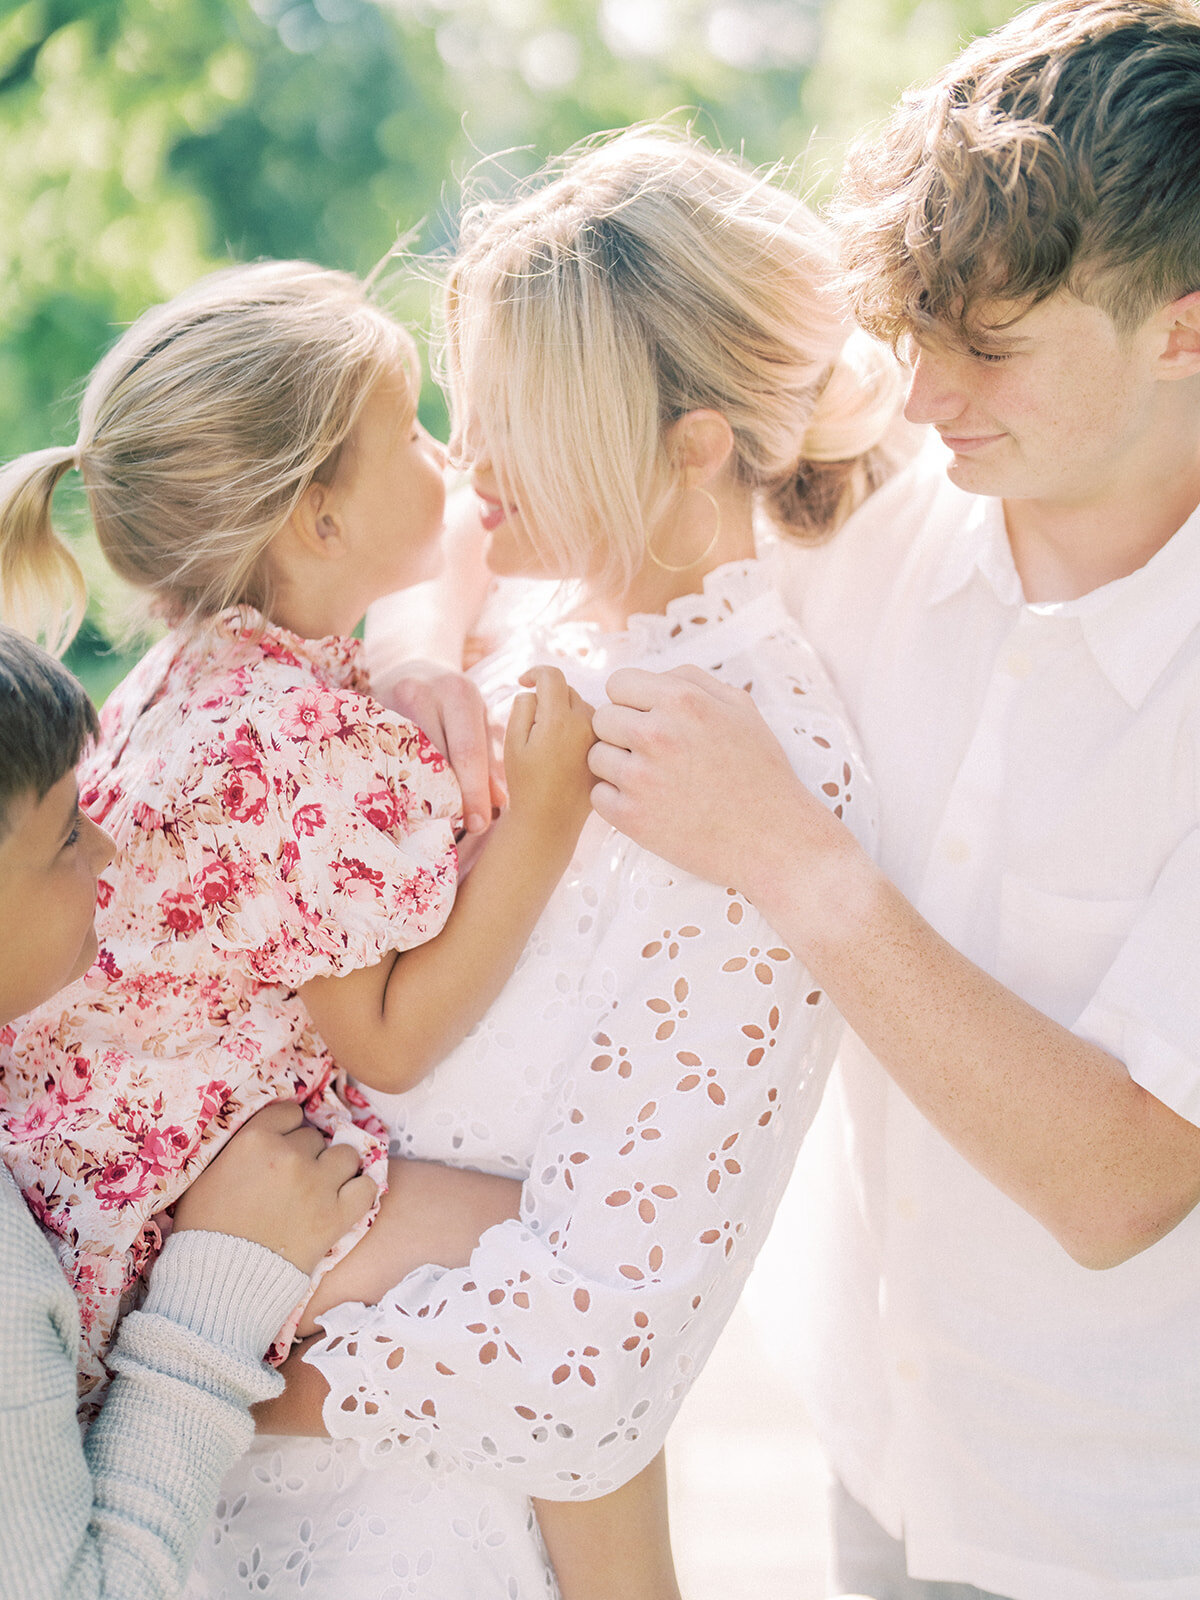 Little girl in floral pink dress is held by her mother and leans into her while older brothers stand on either side of mother.